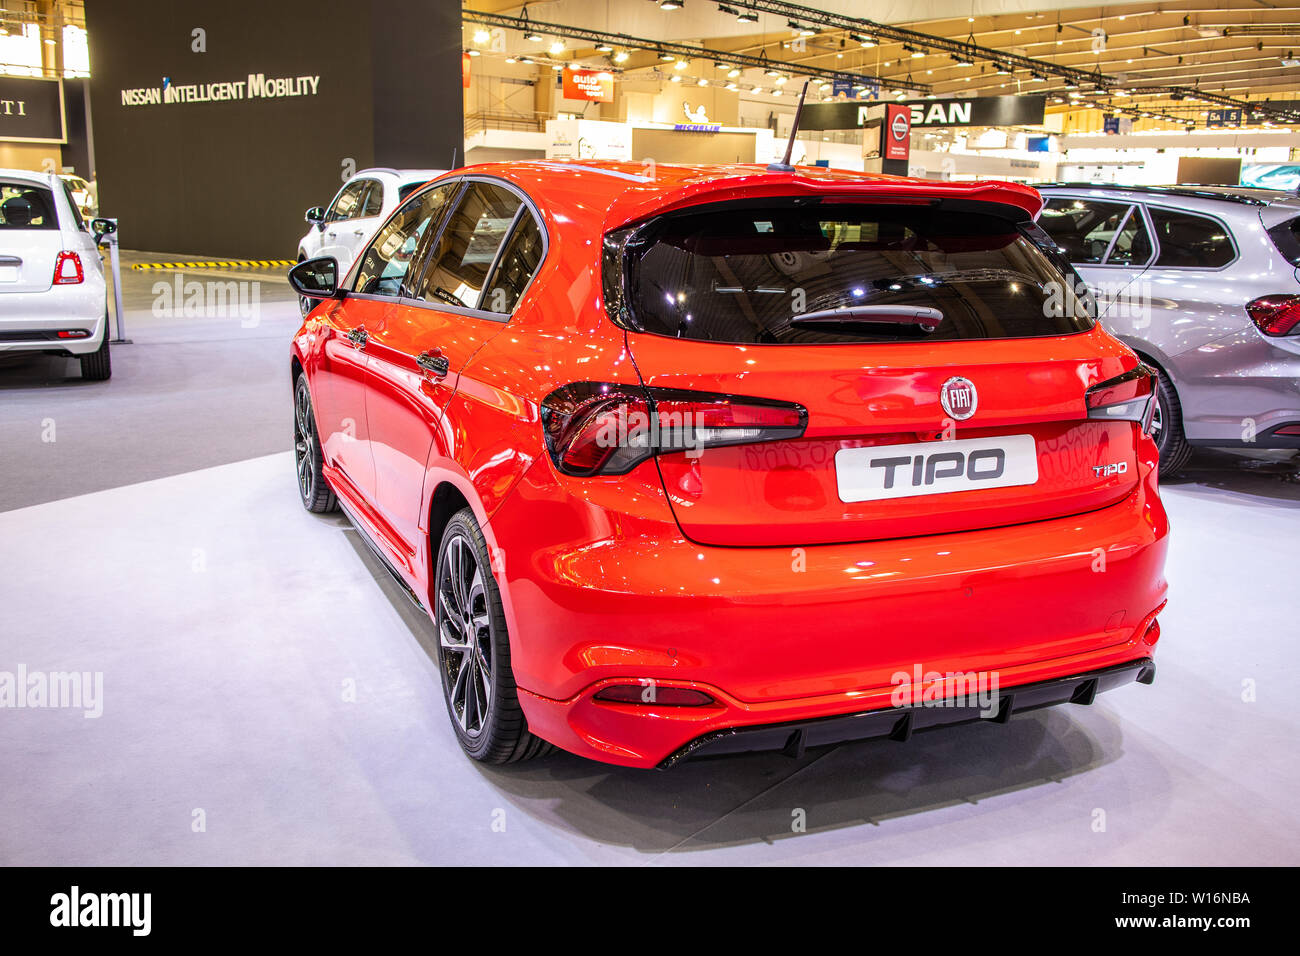 https://c8.alamy.com/comp/W16NBA/poznan-poland-march-2019-red-fiat-tipo-hatchback-5-door-at-poznan-international-motor-show-manufactured-and-marketed-by-fiat-W16NBA.jpg